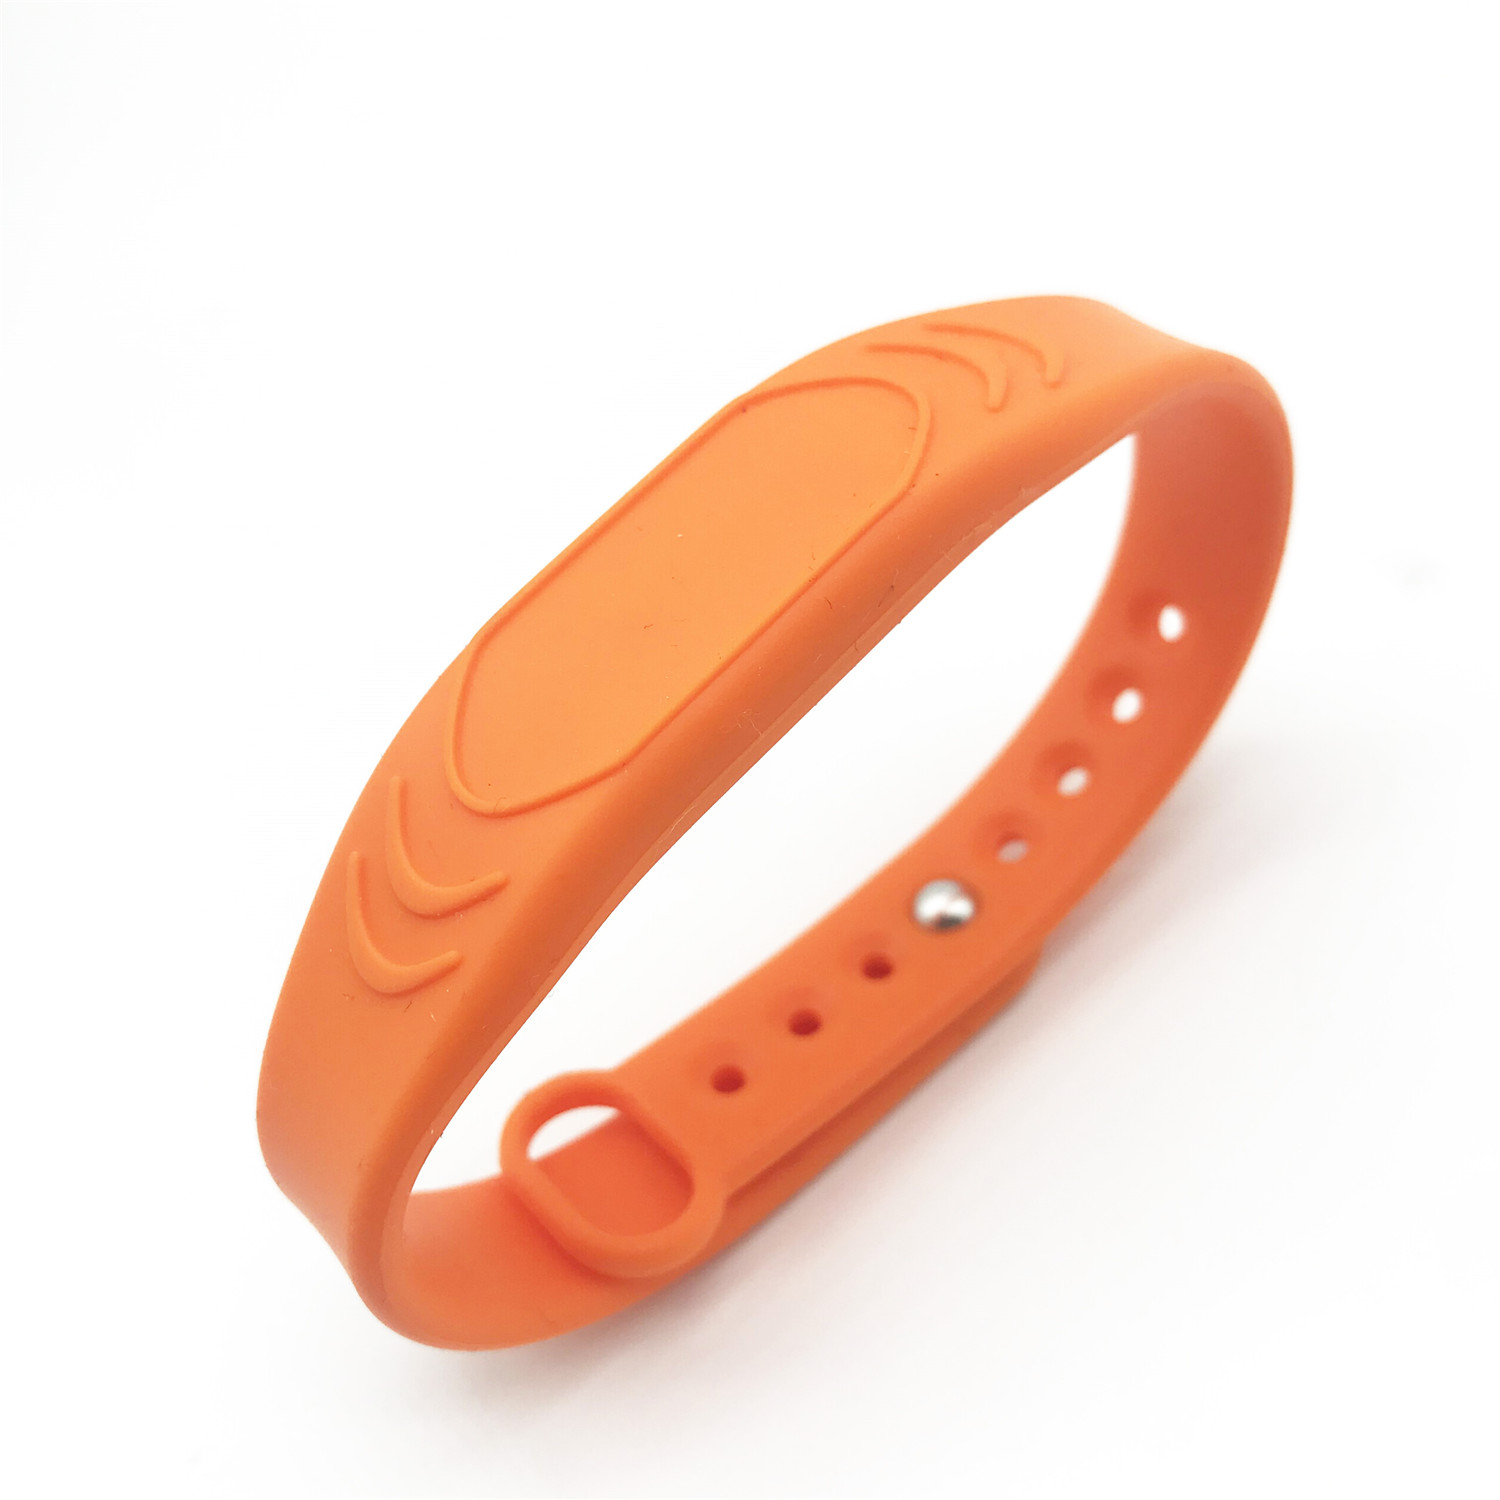 Model ST-G17 NFC Silicon Wristband NTAG213, Mifare 1k Featured Image